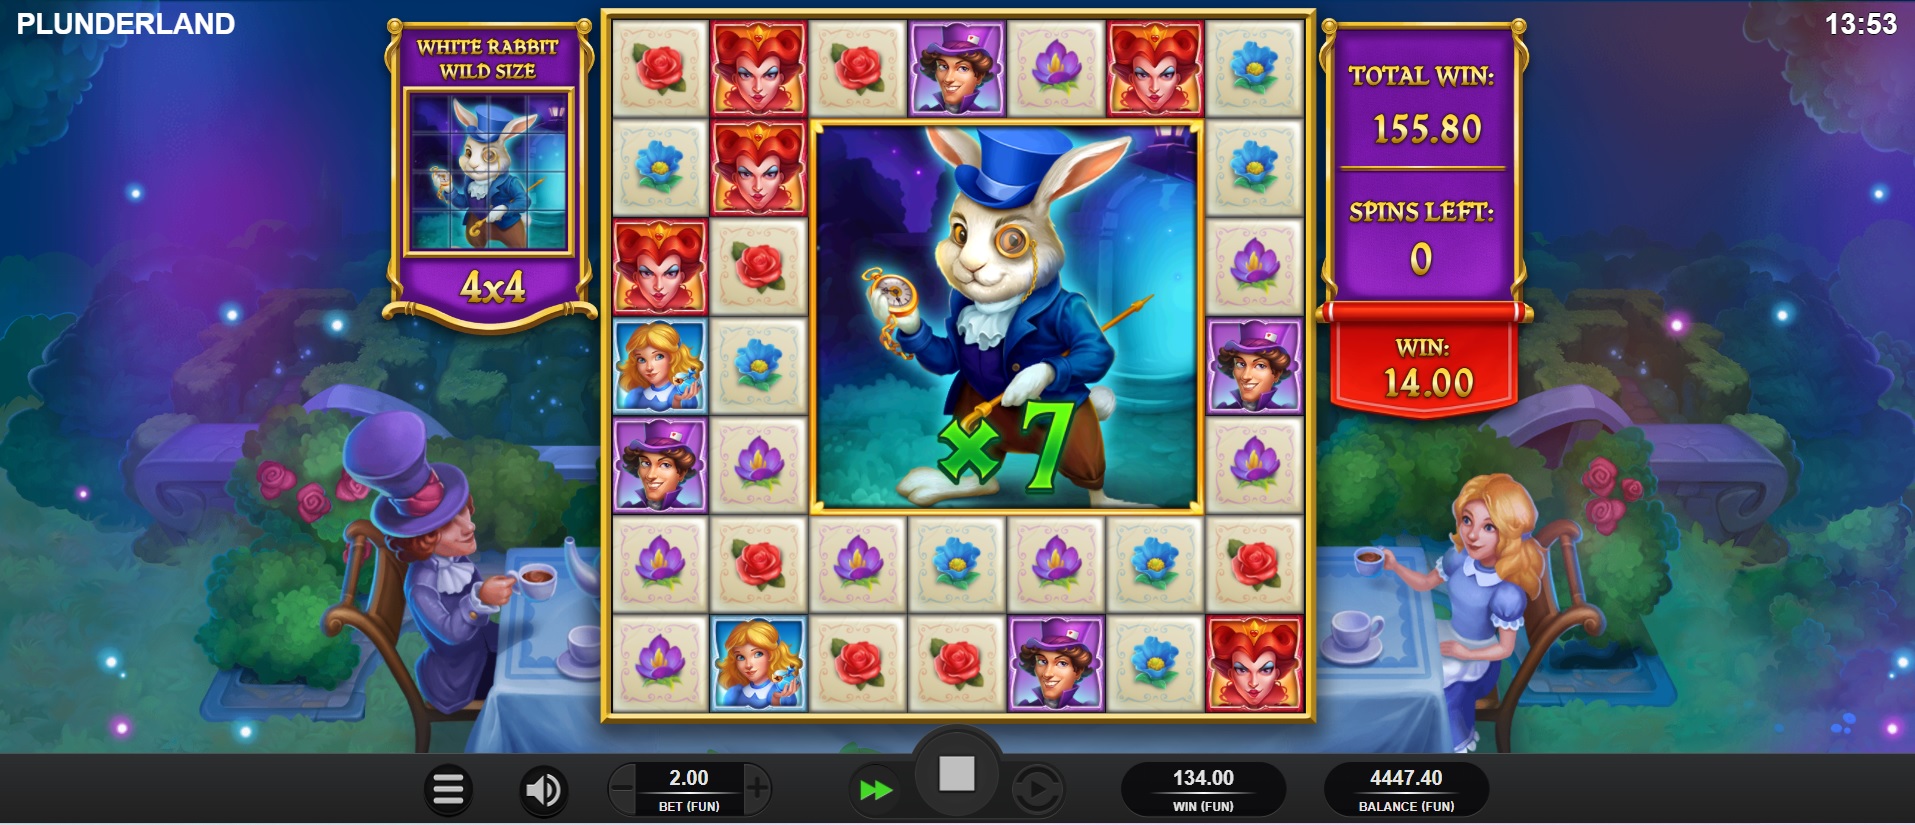 Plunderland slot, Free spins feature